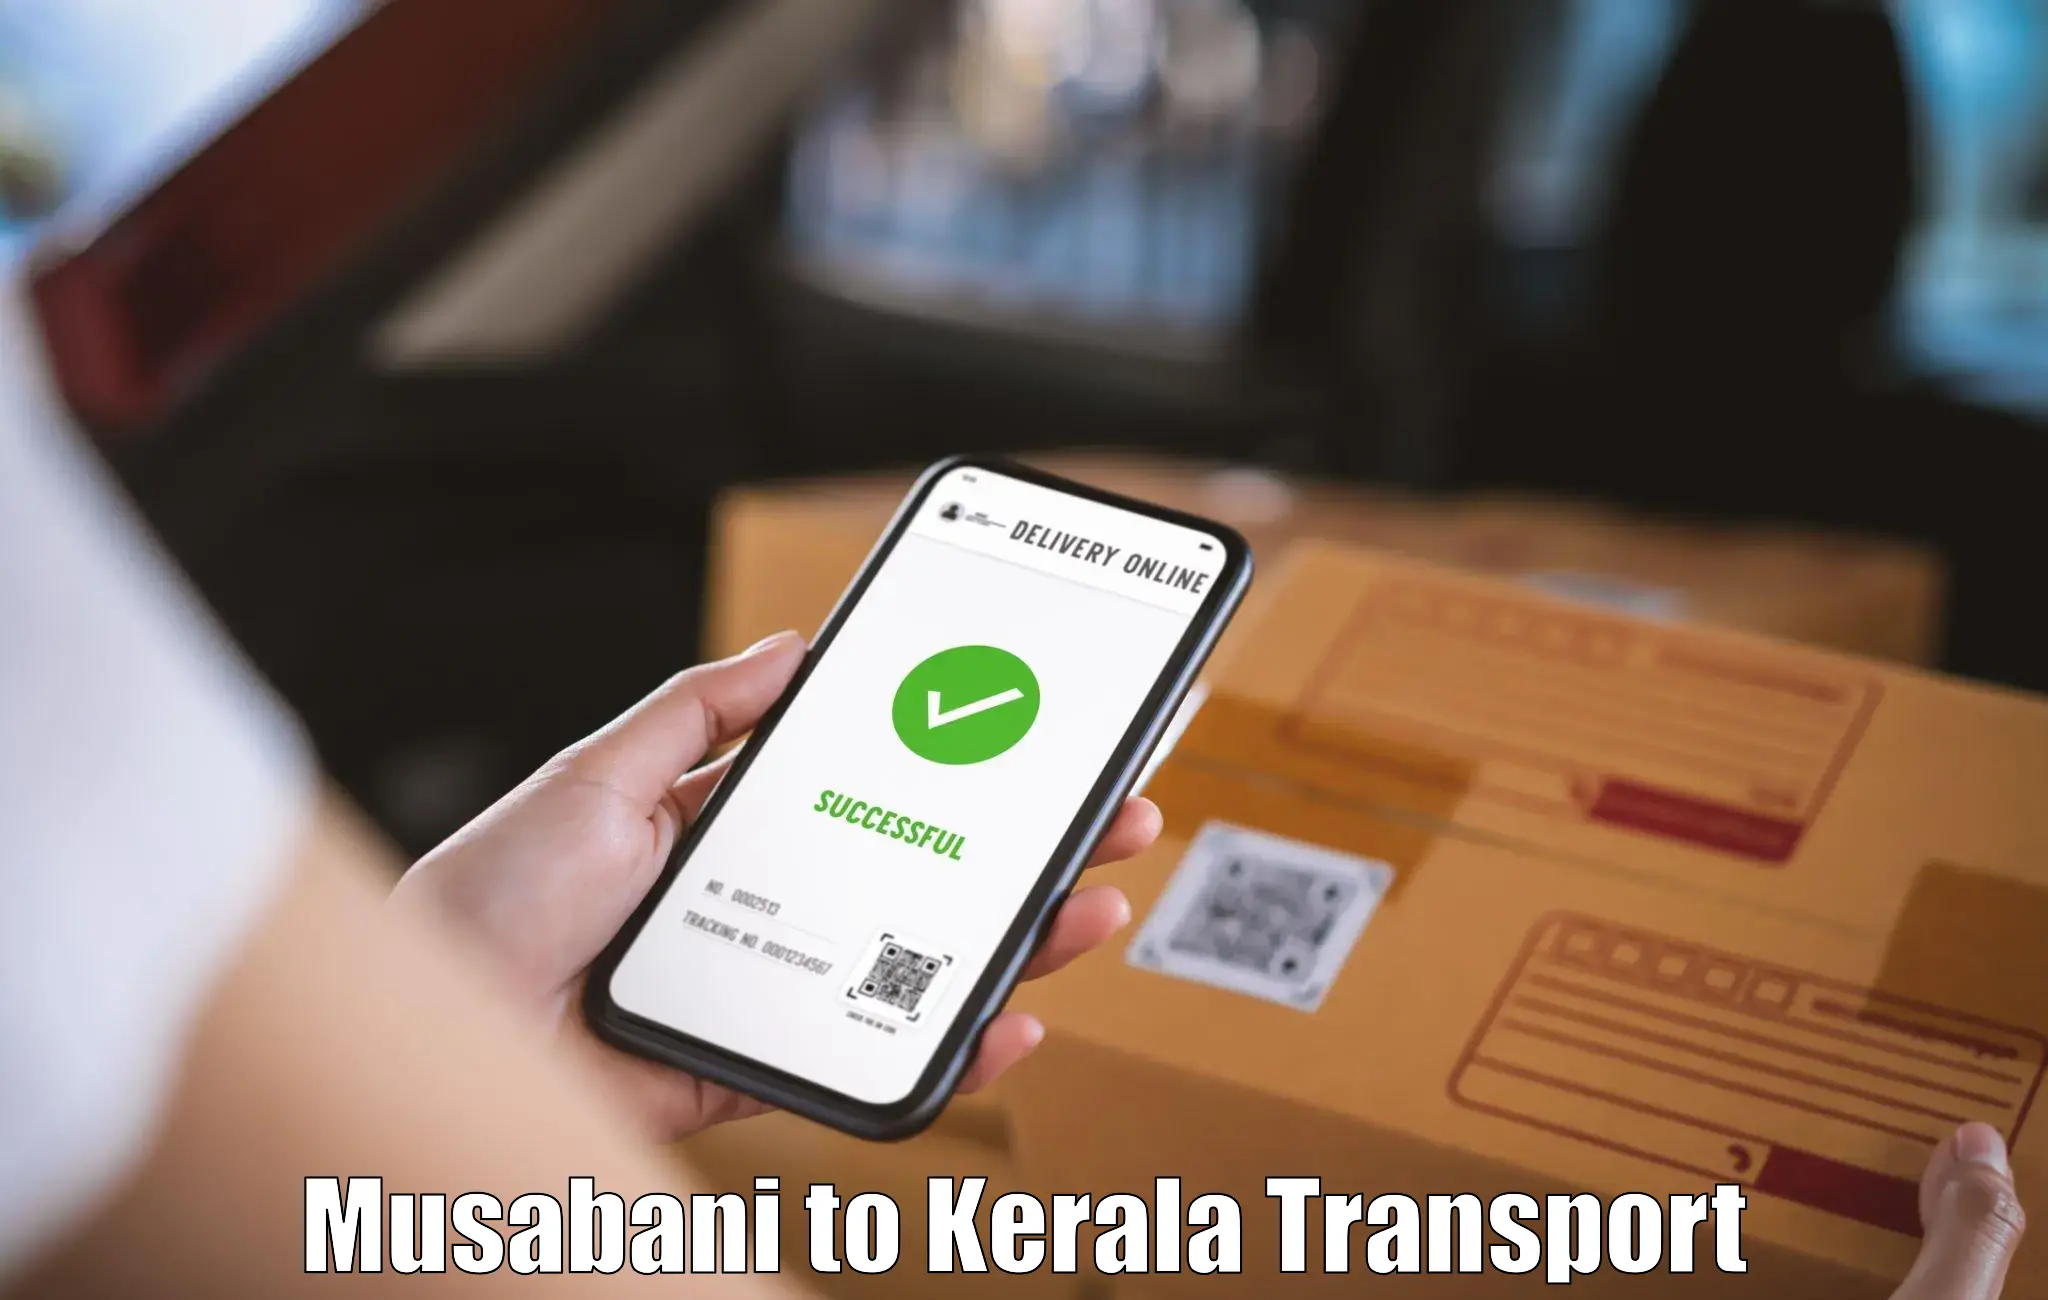 Goods delivery service Musabani to Cochin University of Science and Technology